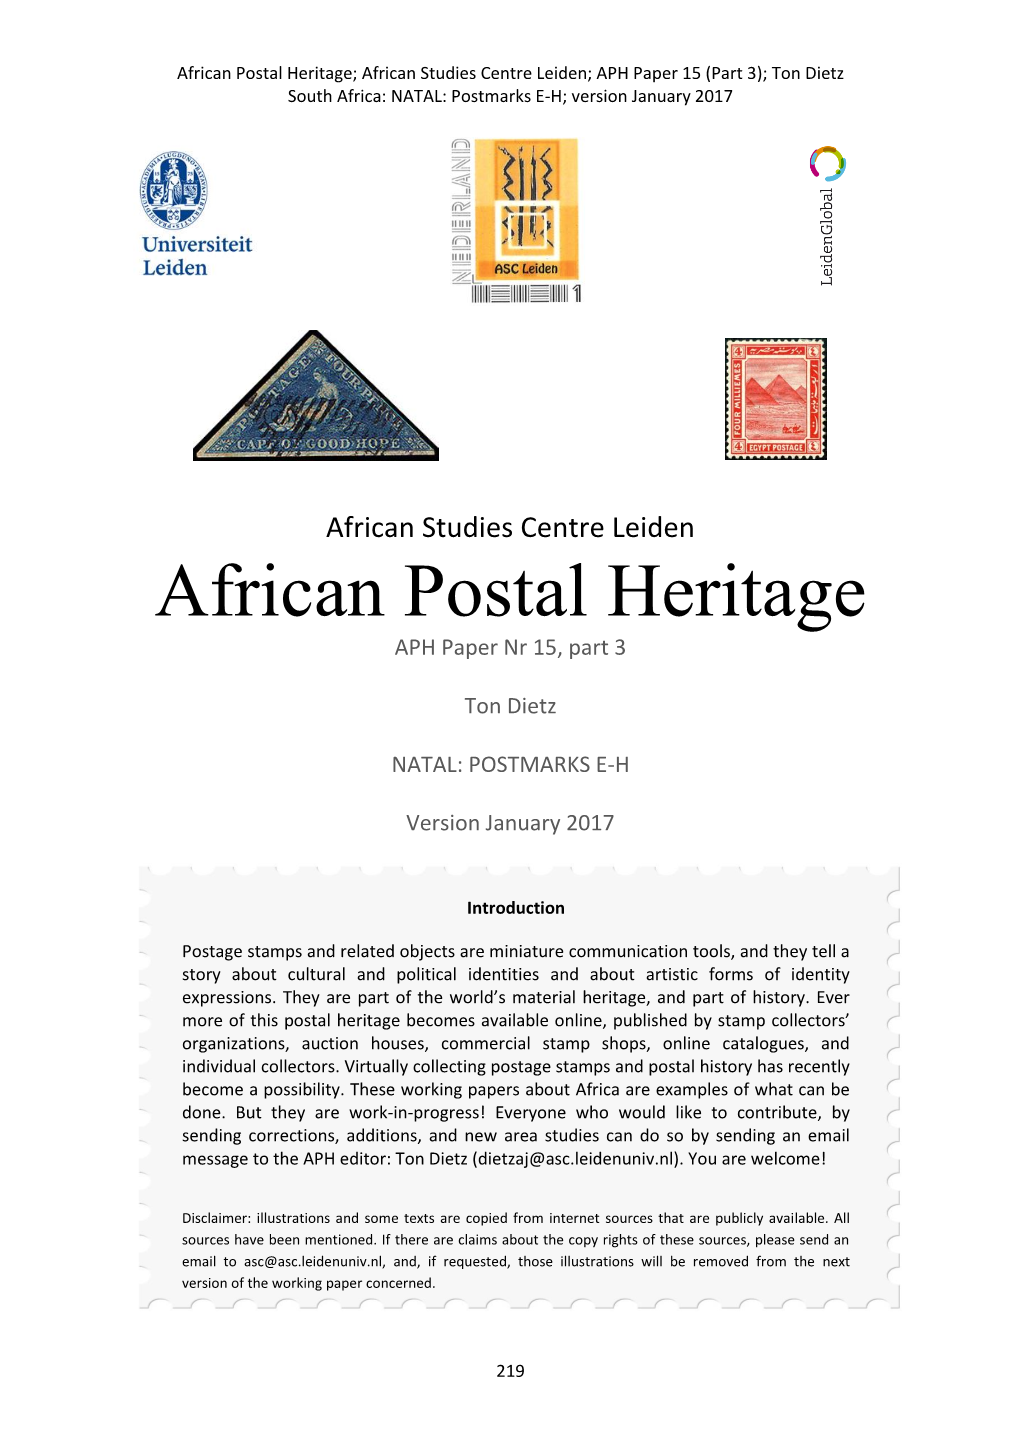 African Postal Heritage; African Studies Centre Leiden; APH Paper 15 (Part 3); Ton Dietz South Africa: NATAL: Postmarks E-H; Version January 2017